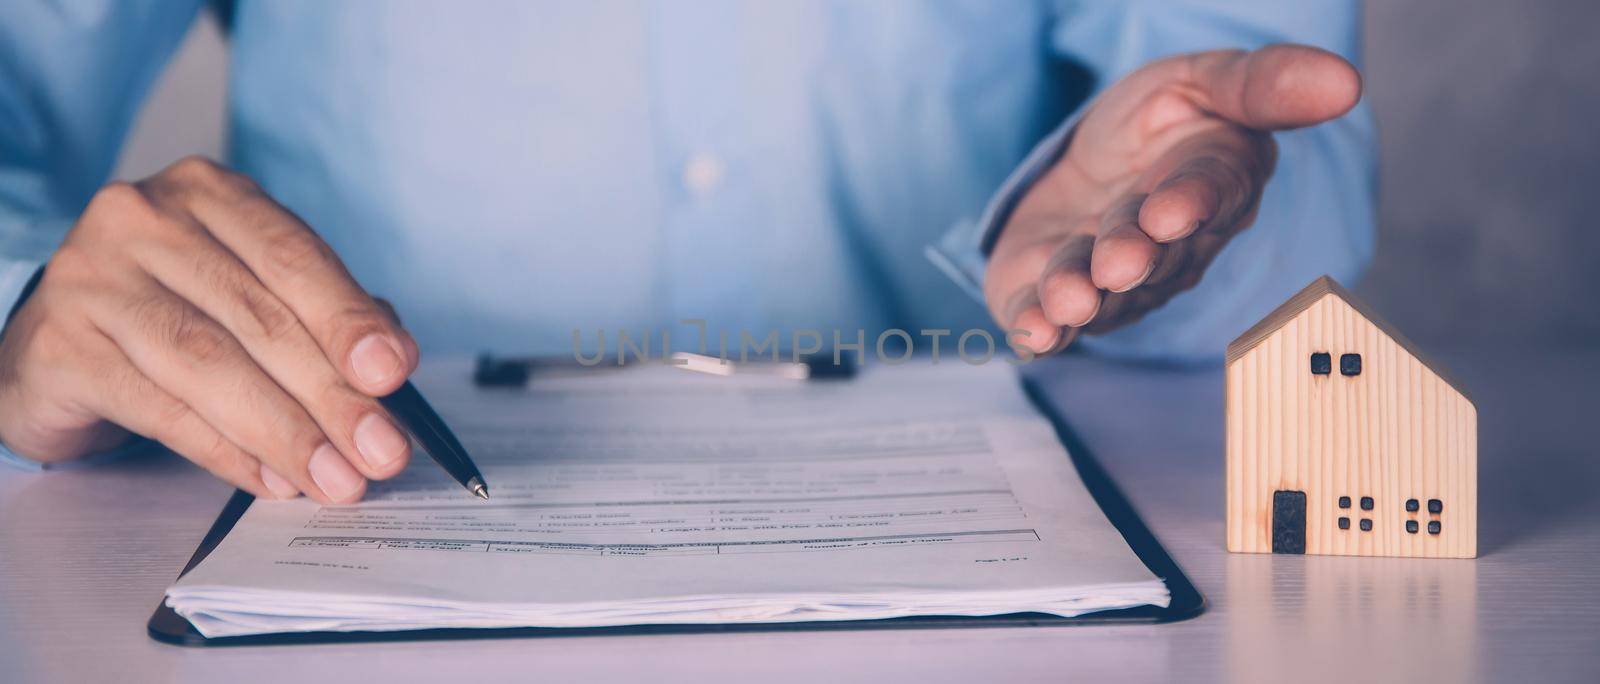 Real estate agent holding home and signing contract about agreement of real property on desk, house broker and planning investment, businessman writing on document form rent house, business concept.